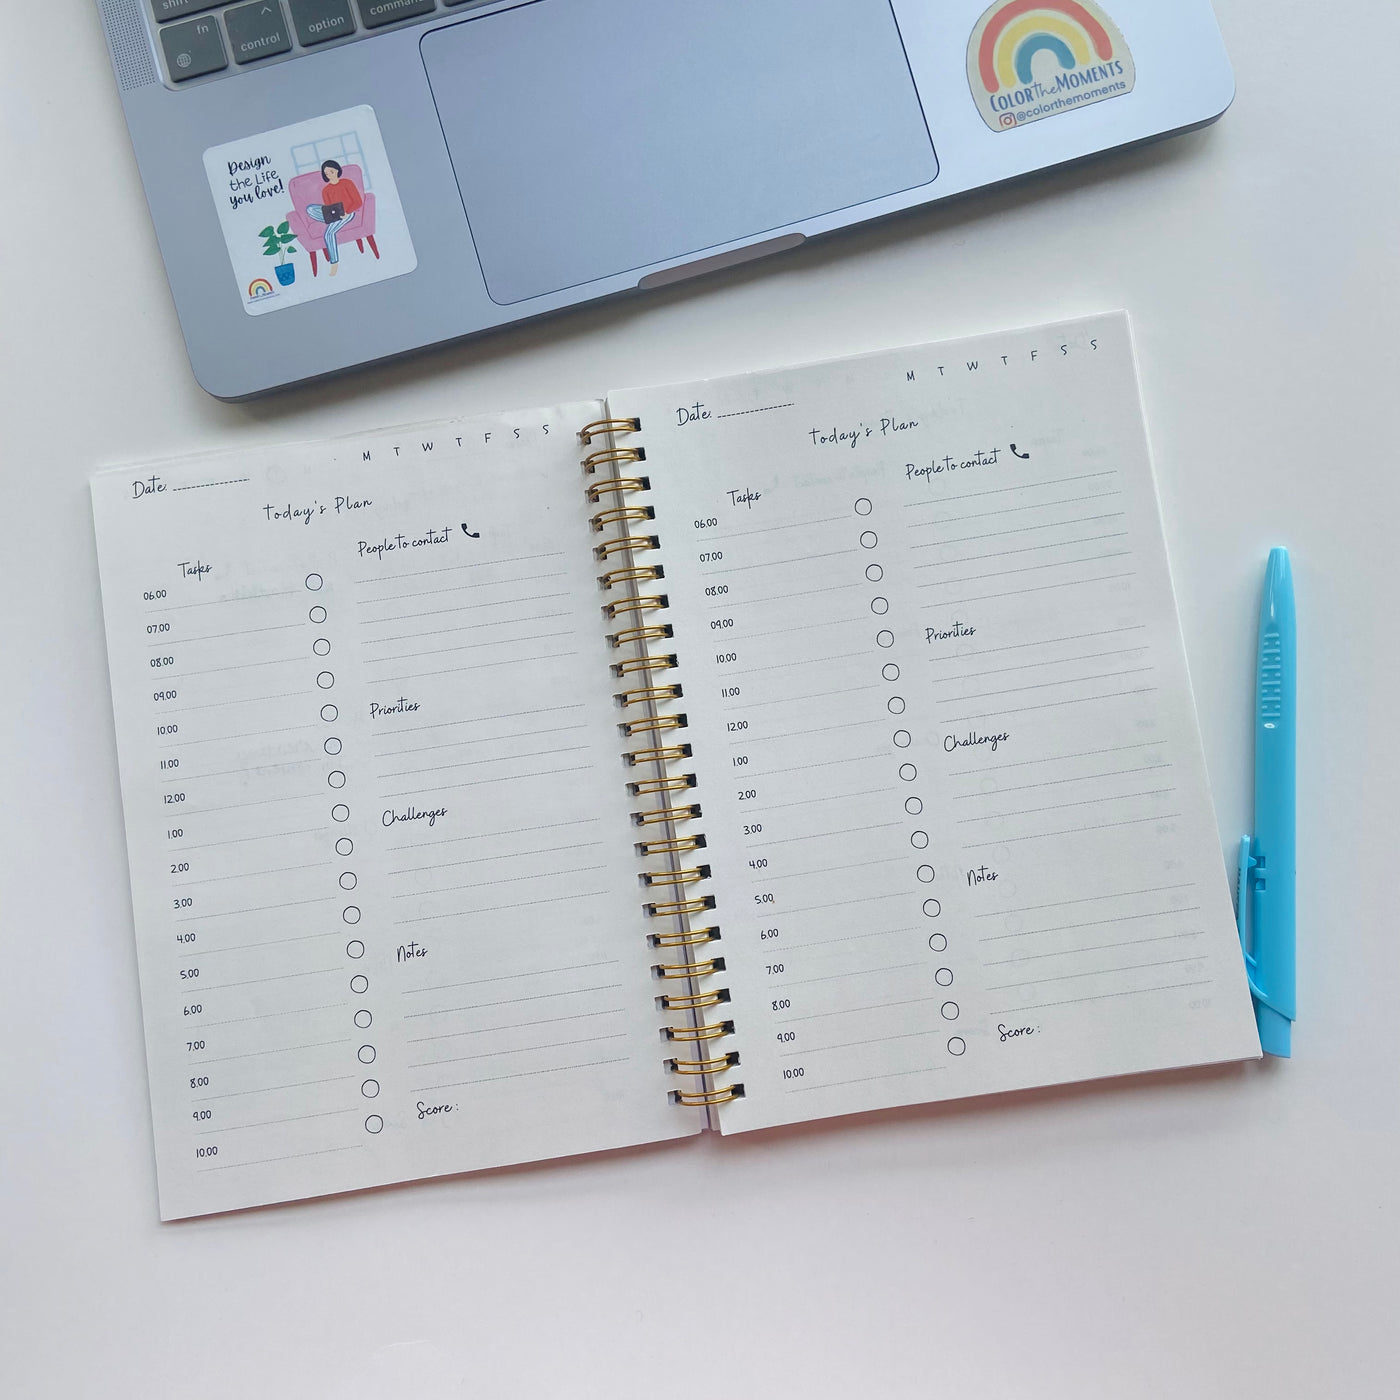 Inside the daily planner: Today's plan section with tasks, people to contact, priorities, challenges, notes and score